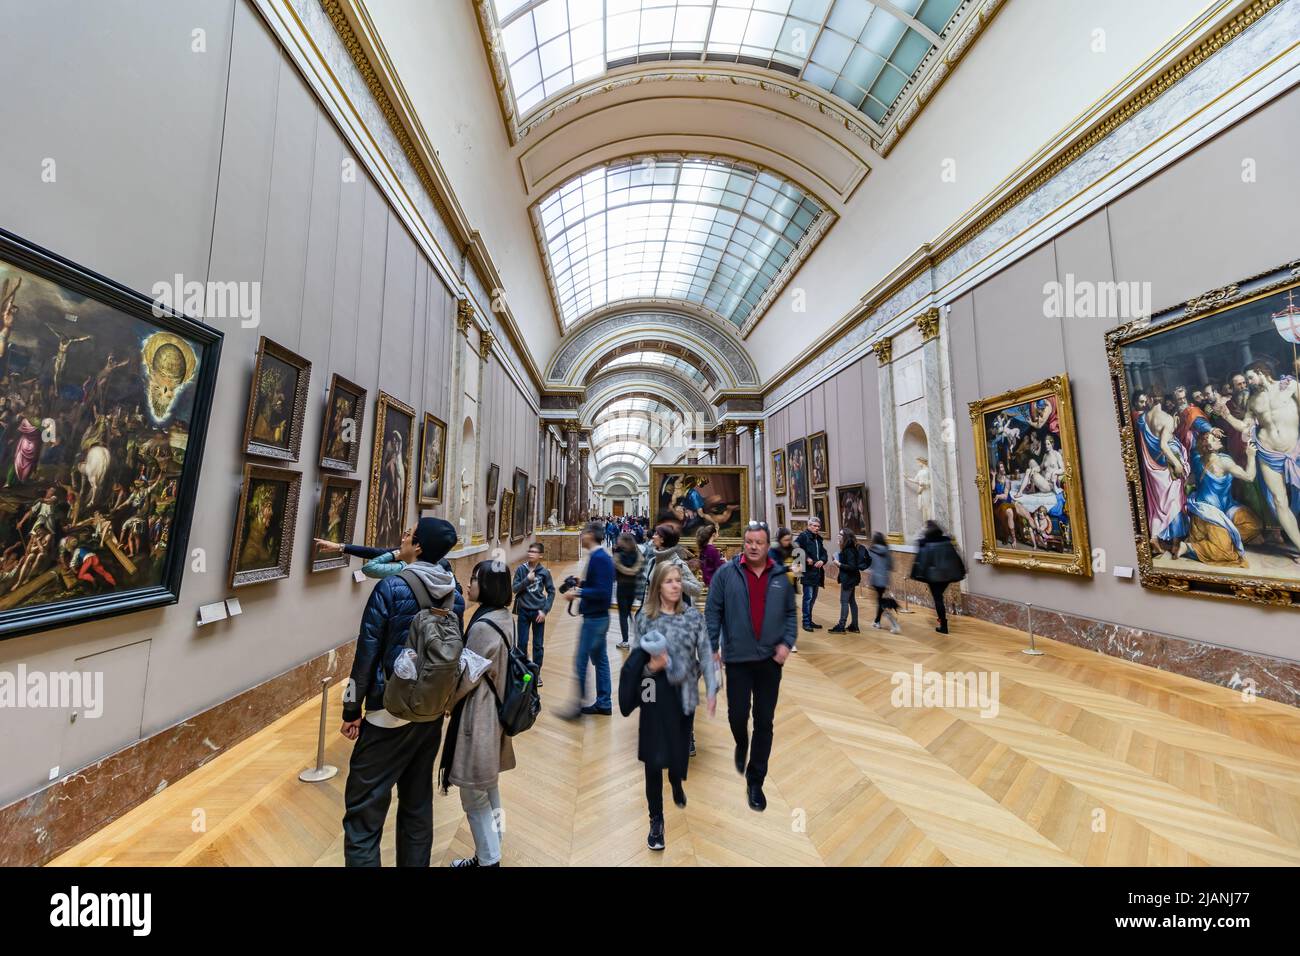 Paris, France - March 18, 2018: Inside of the Parisian Louvre Museum with crowds of people visiting it Stock Photo